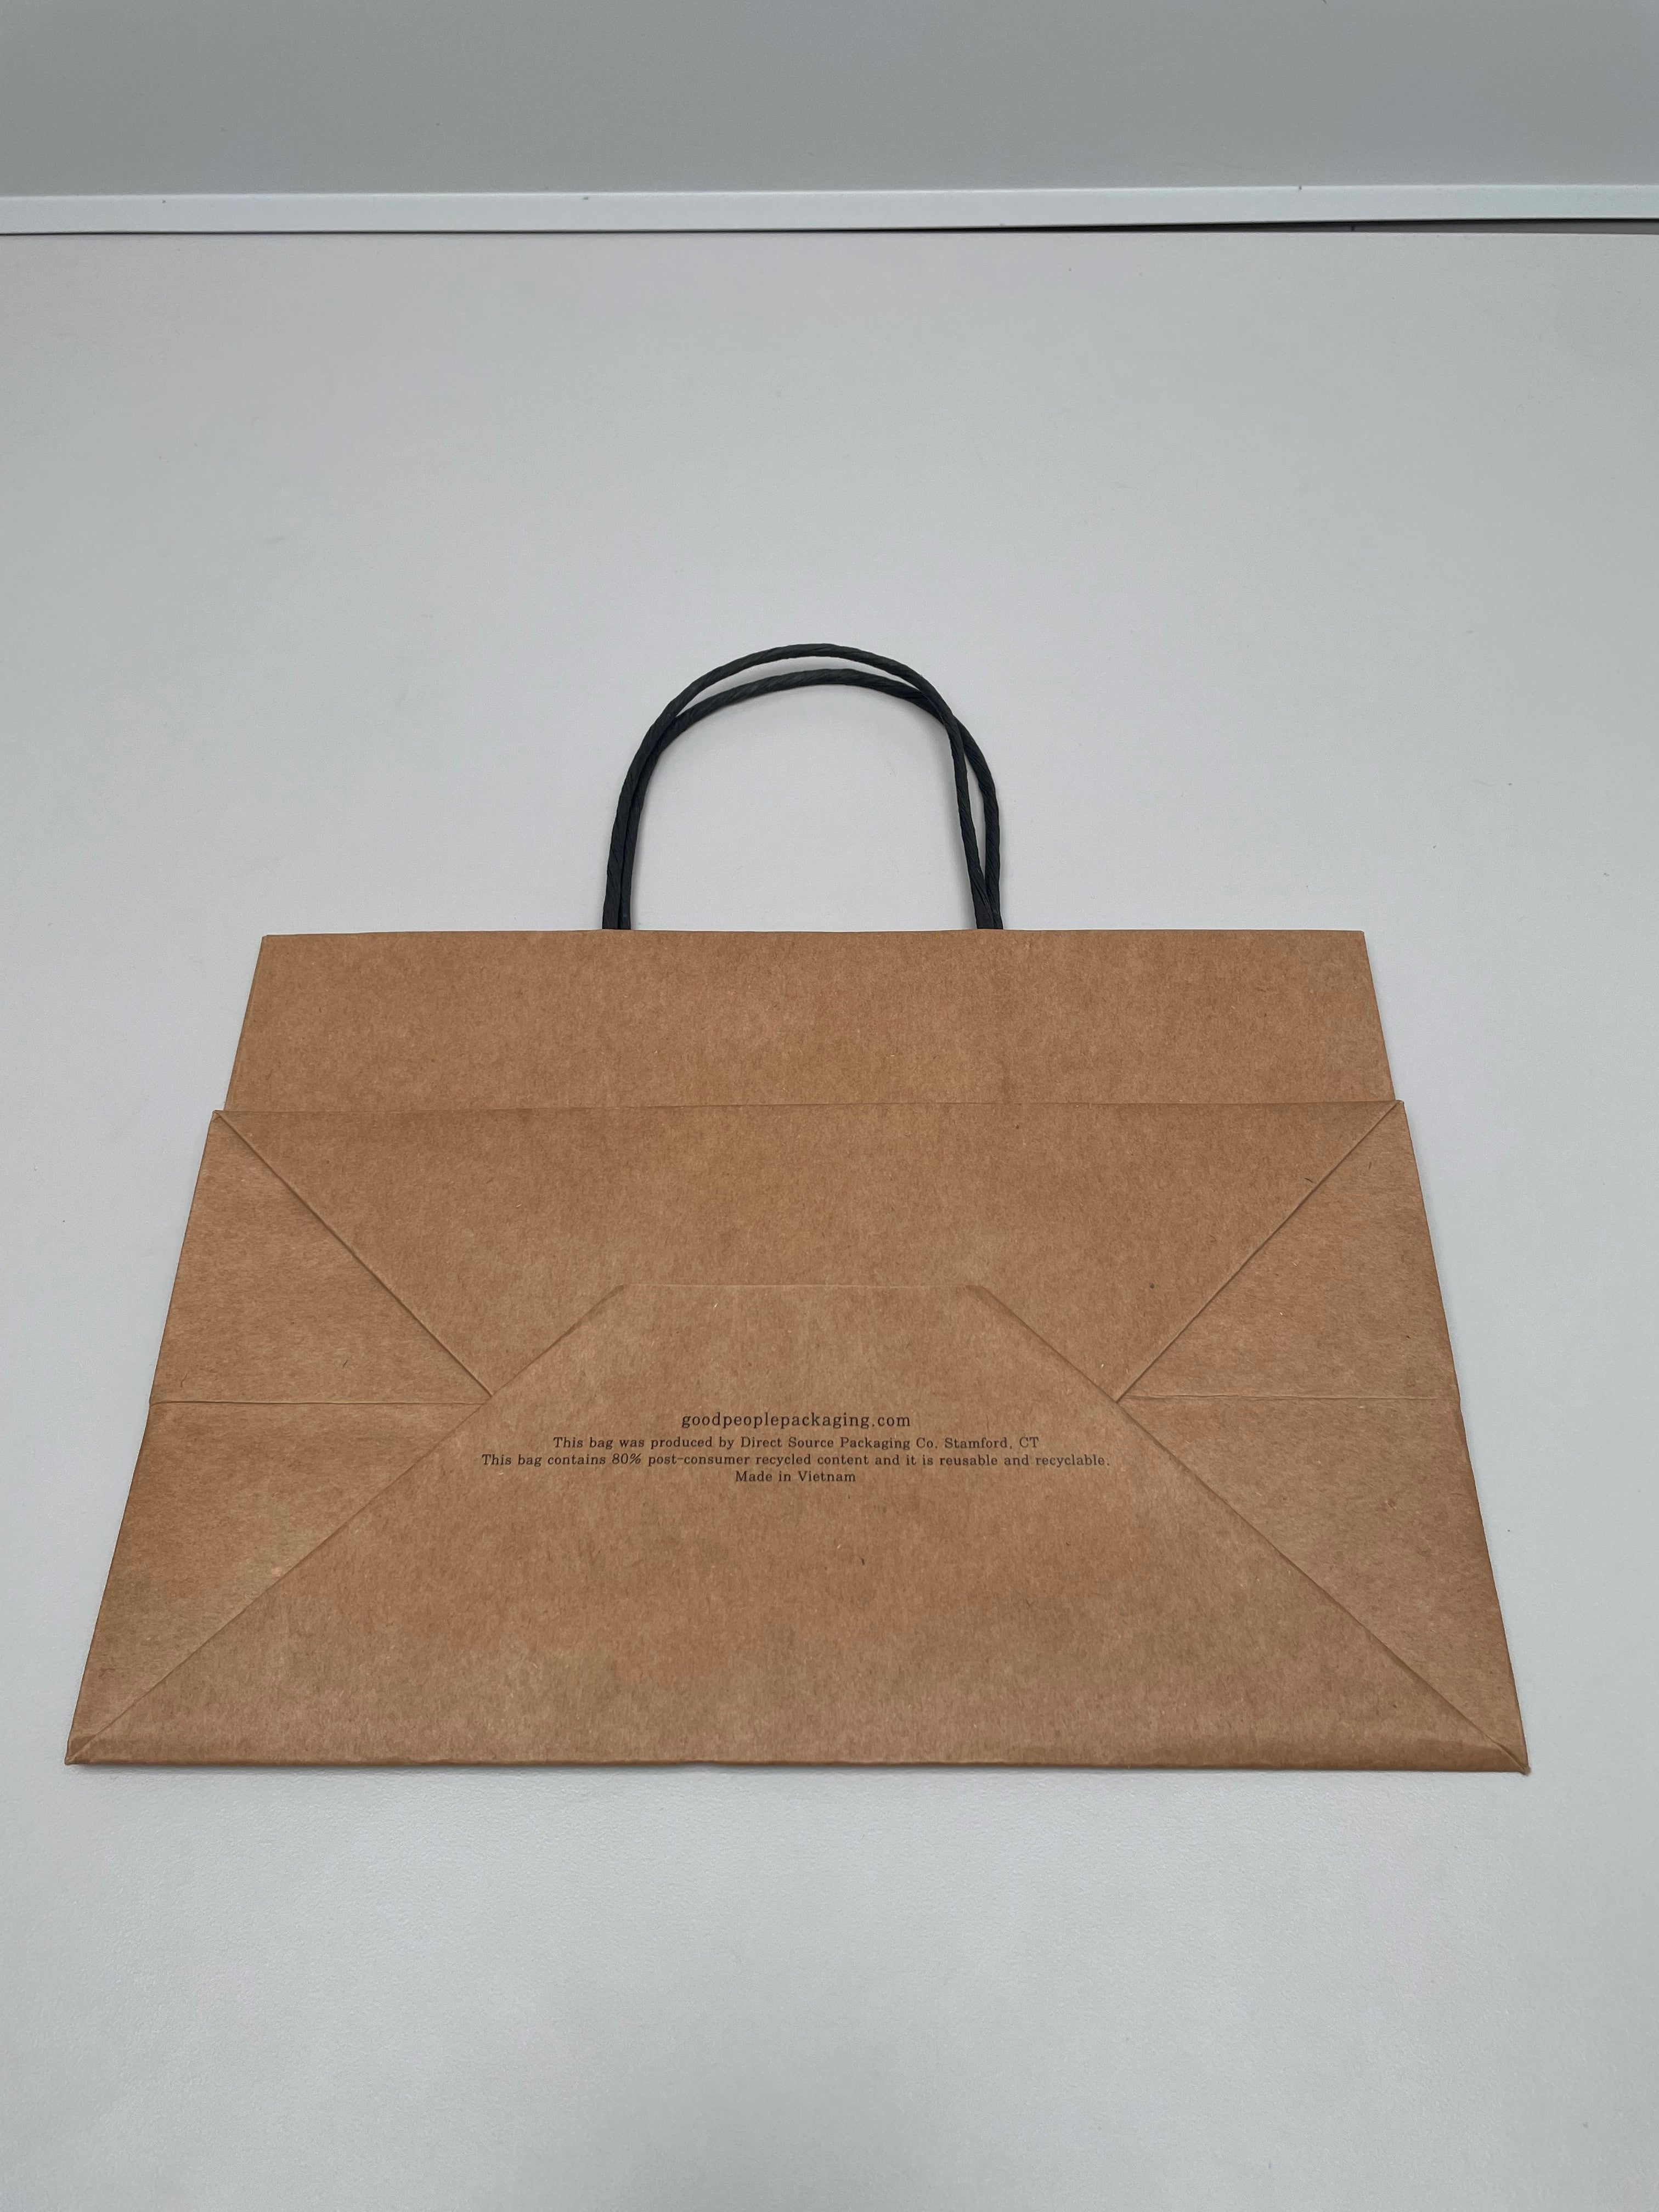 Blank Paper Caddy Bag ($100 for case of 100 bags)